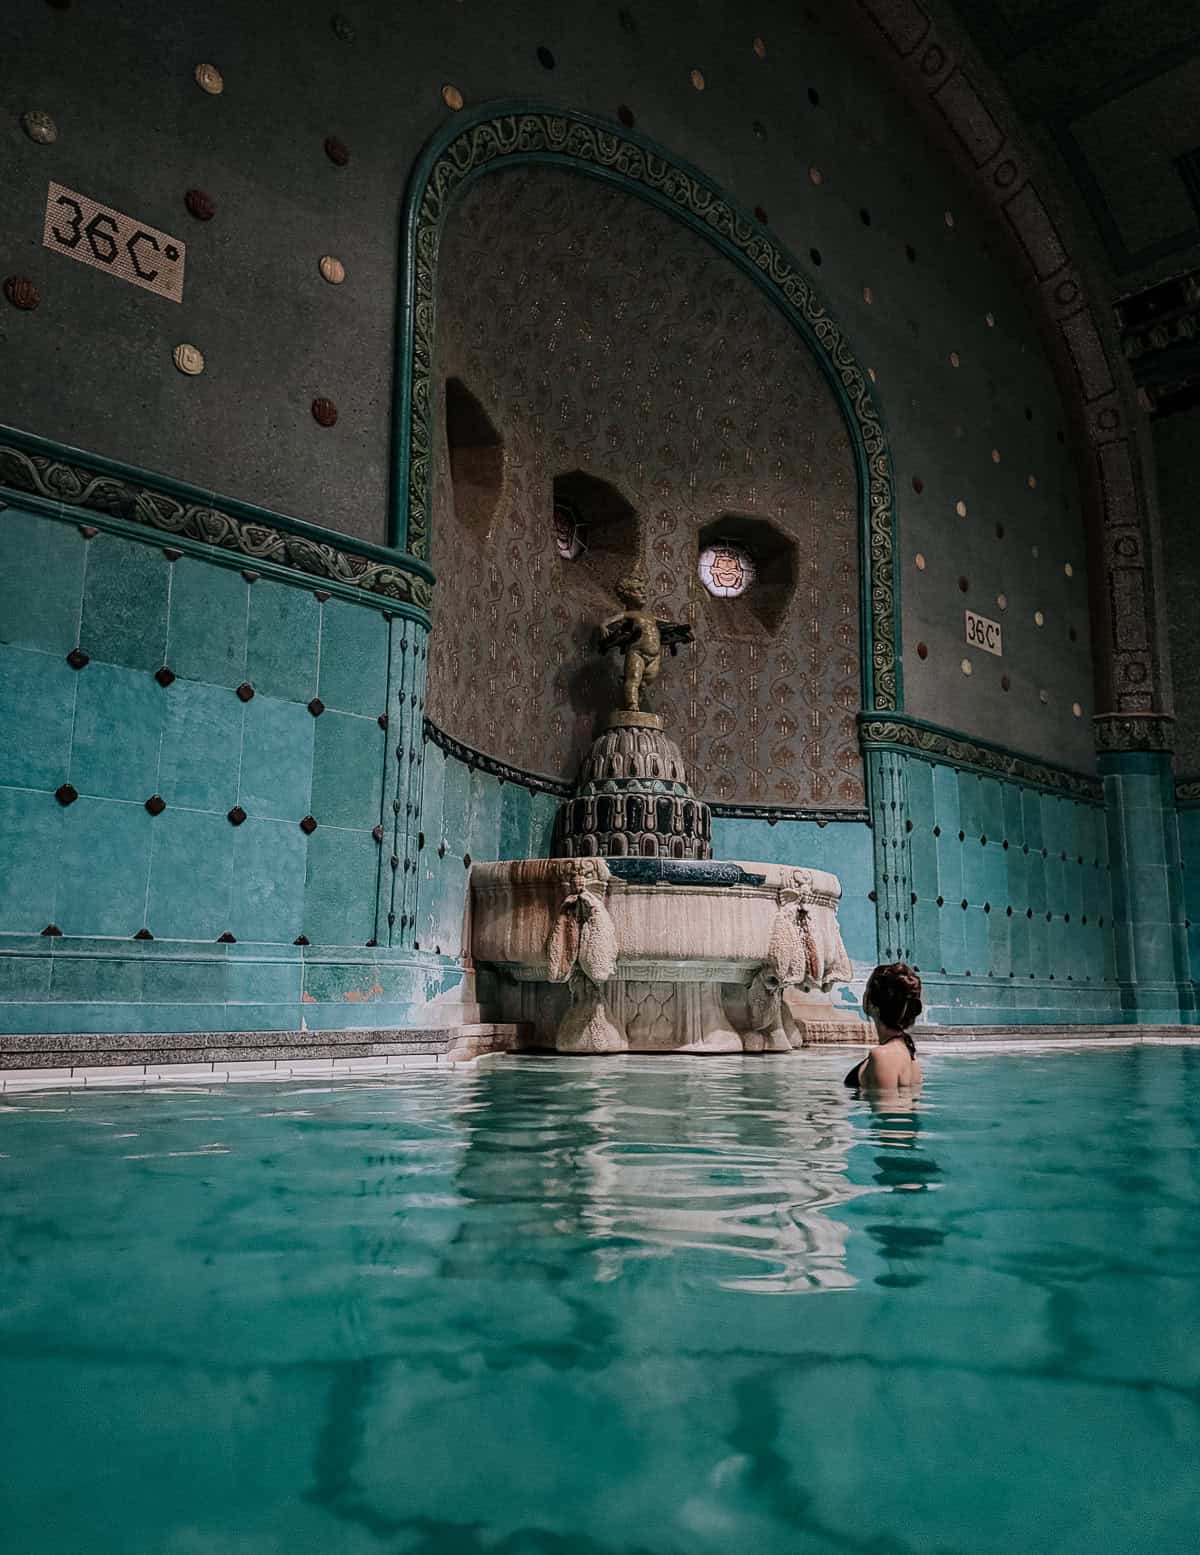 A person enjoys a thermal bath in a historic indoor pool, with a statue and 36°C temperature sign in the background, surrounded by teal tiles and ornate walls.